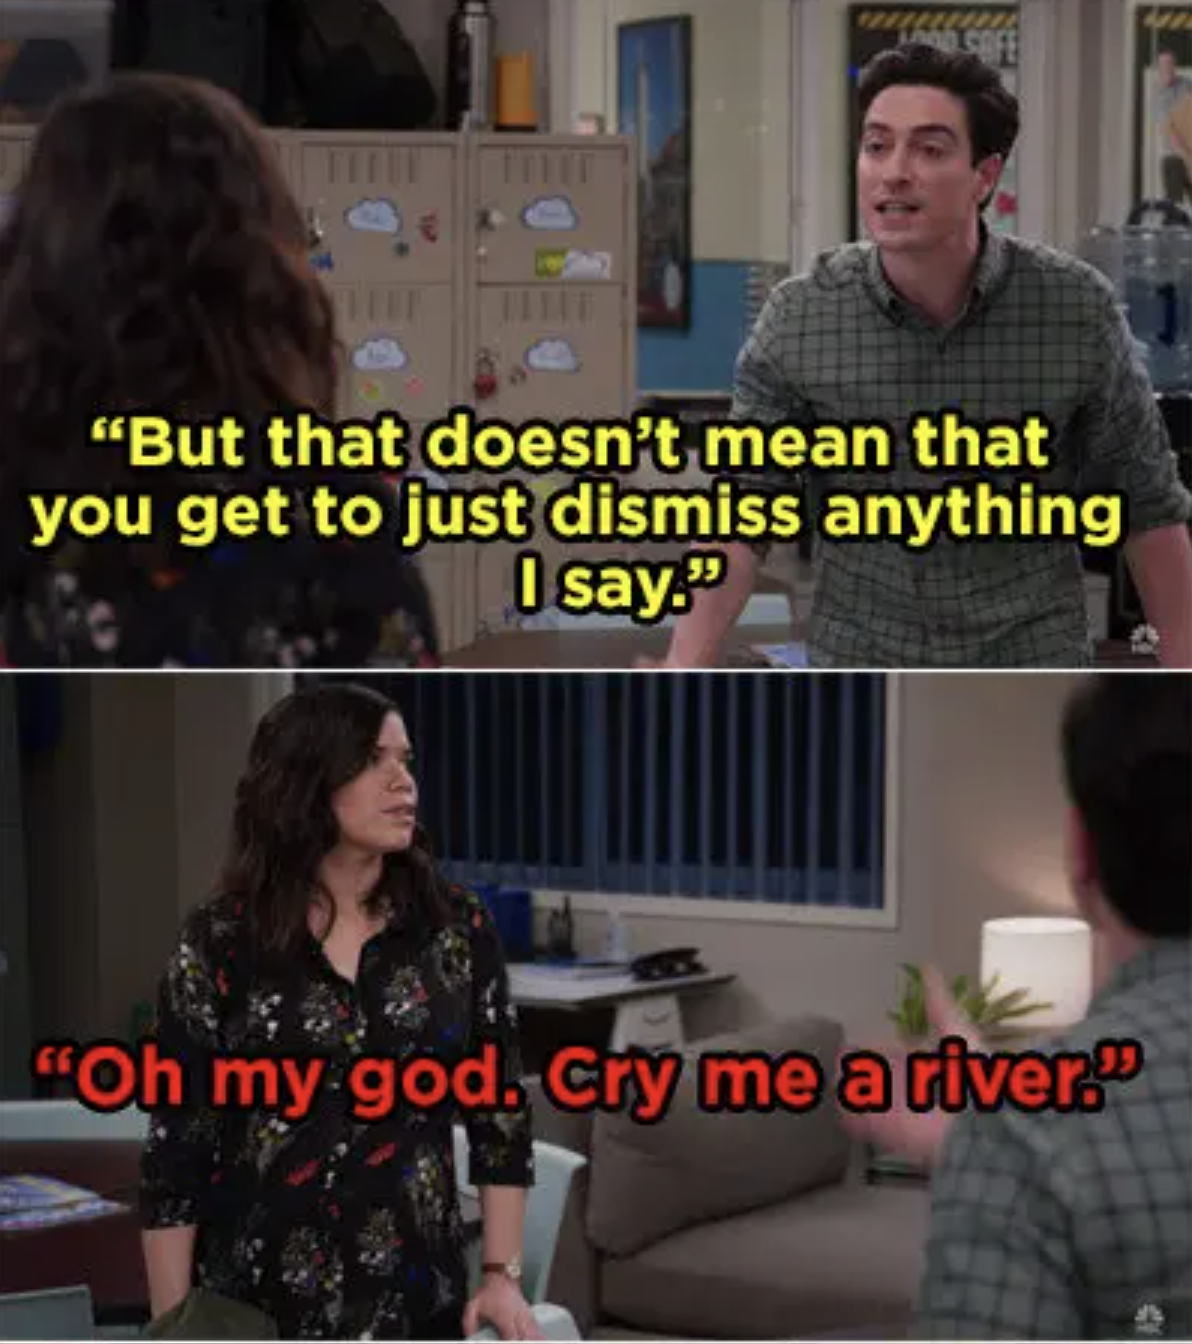 Jonah: &quot;That doesn&#x27;t mean you get to just dismiss anything I say,&quot; Amy: &quot;Oh my god, cry me a river&quot;